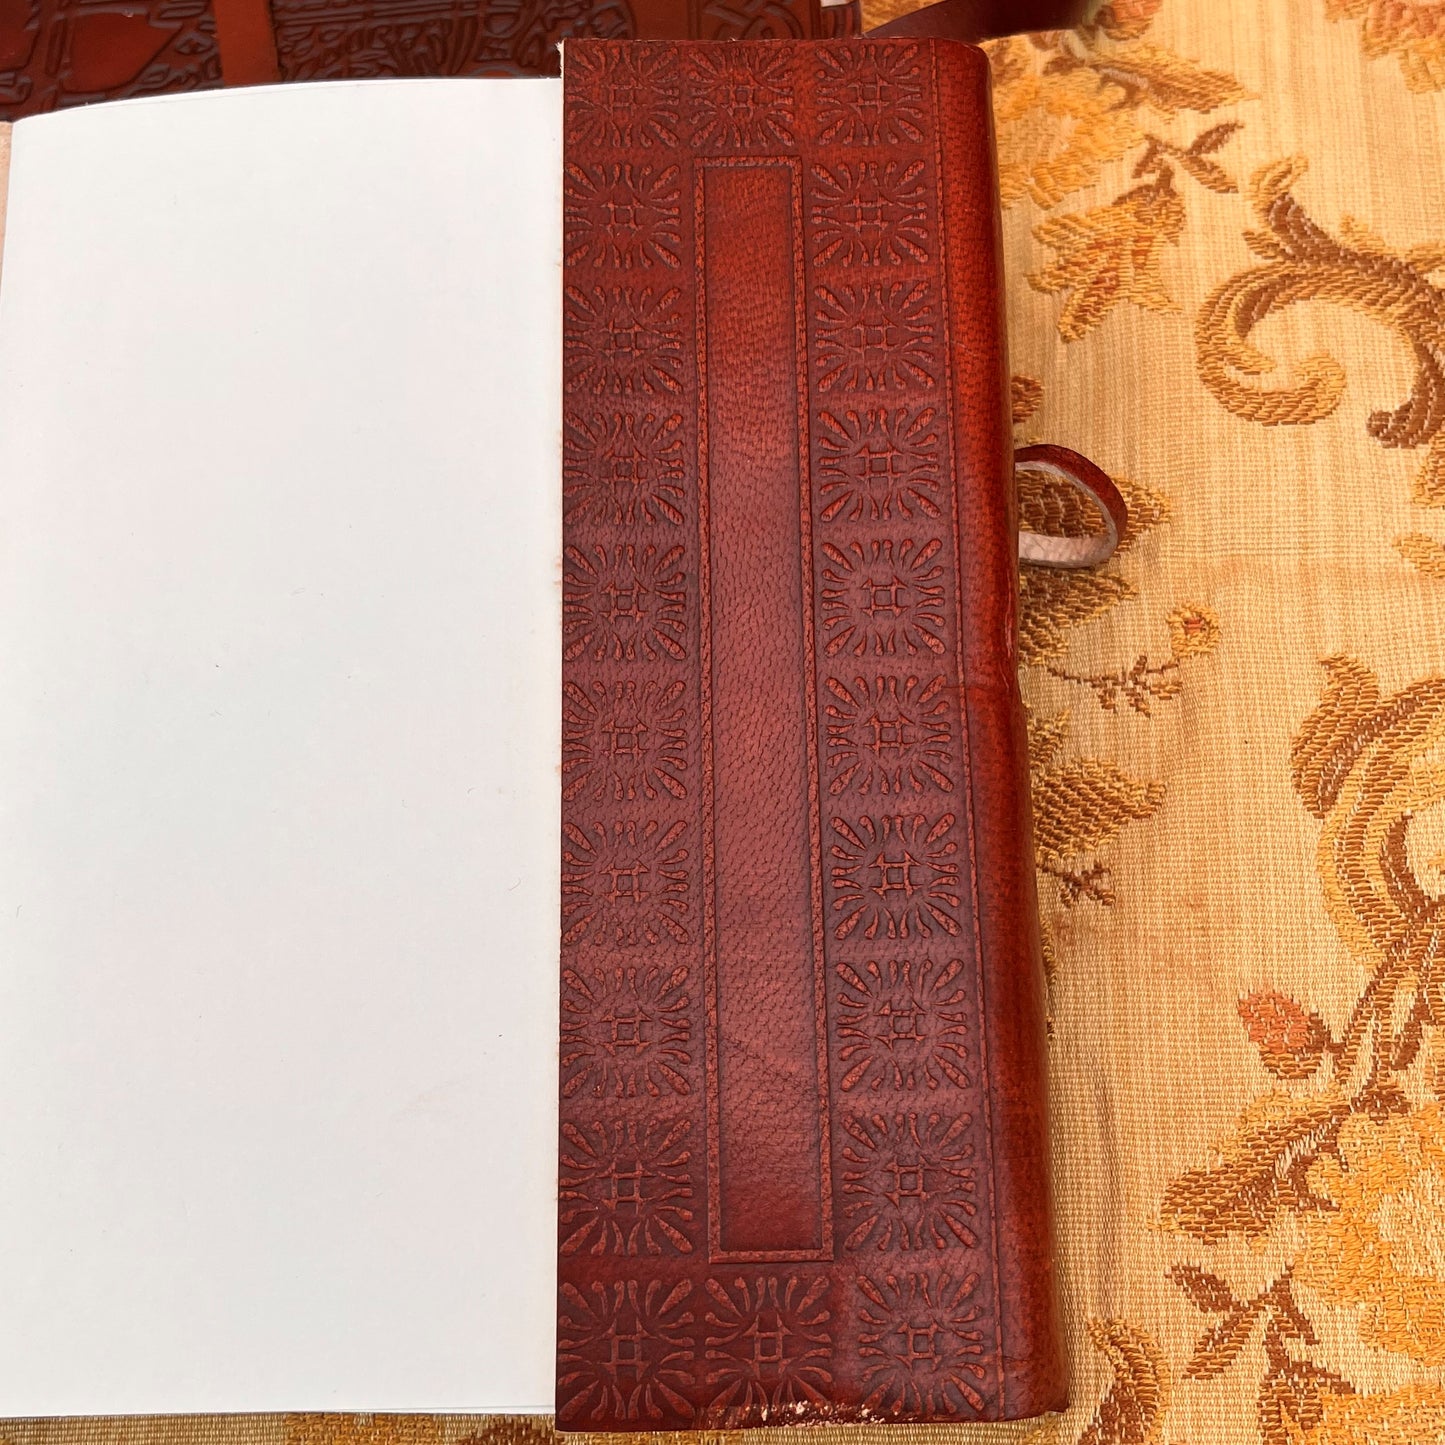 Celtic Cross Writing Book in Burgundy Leather